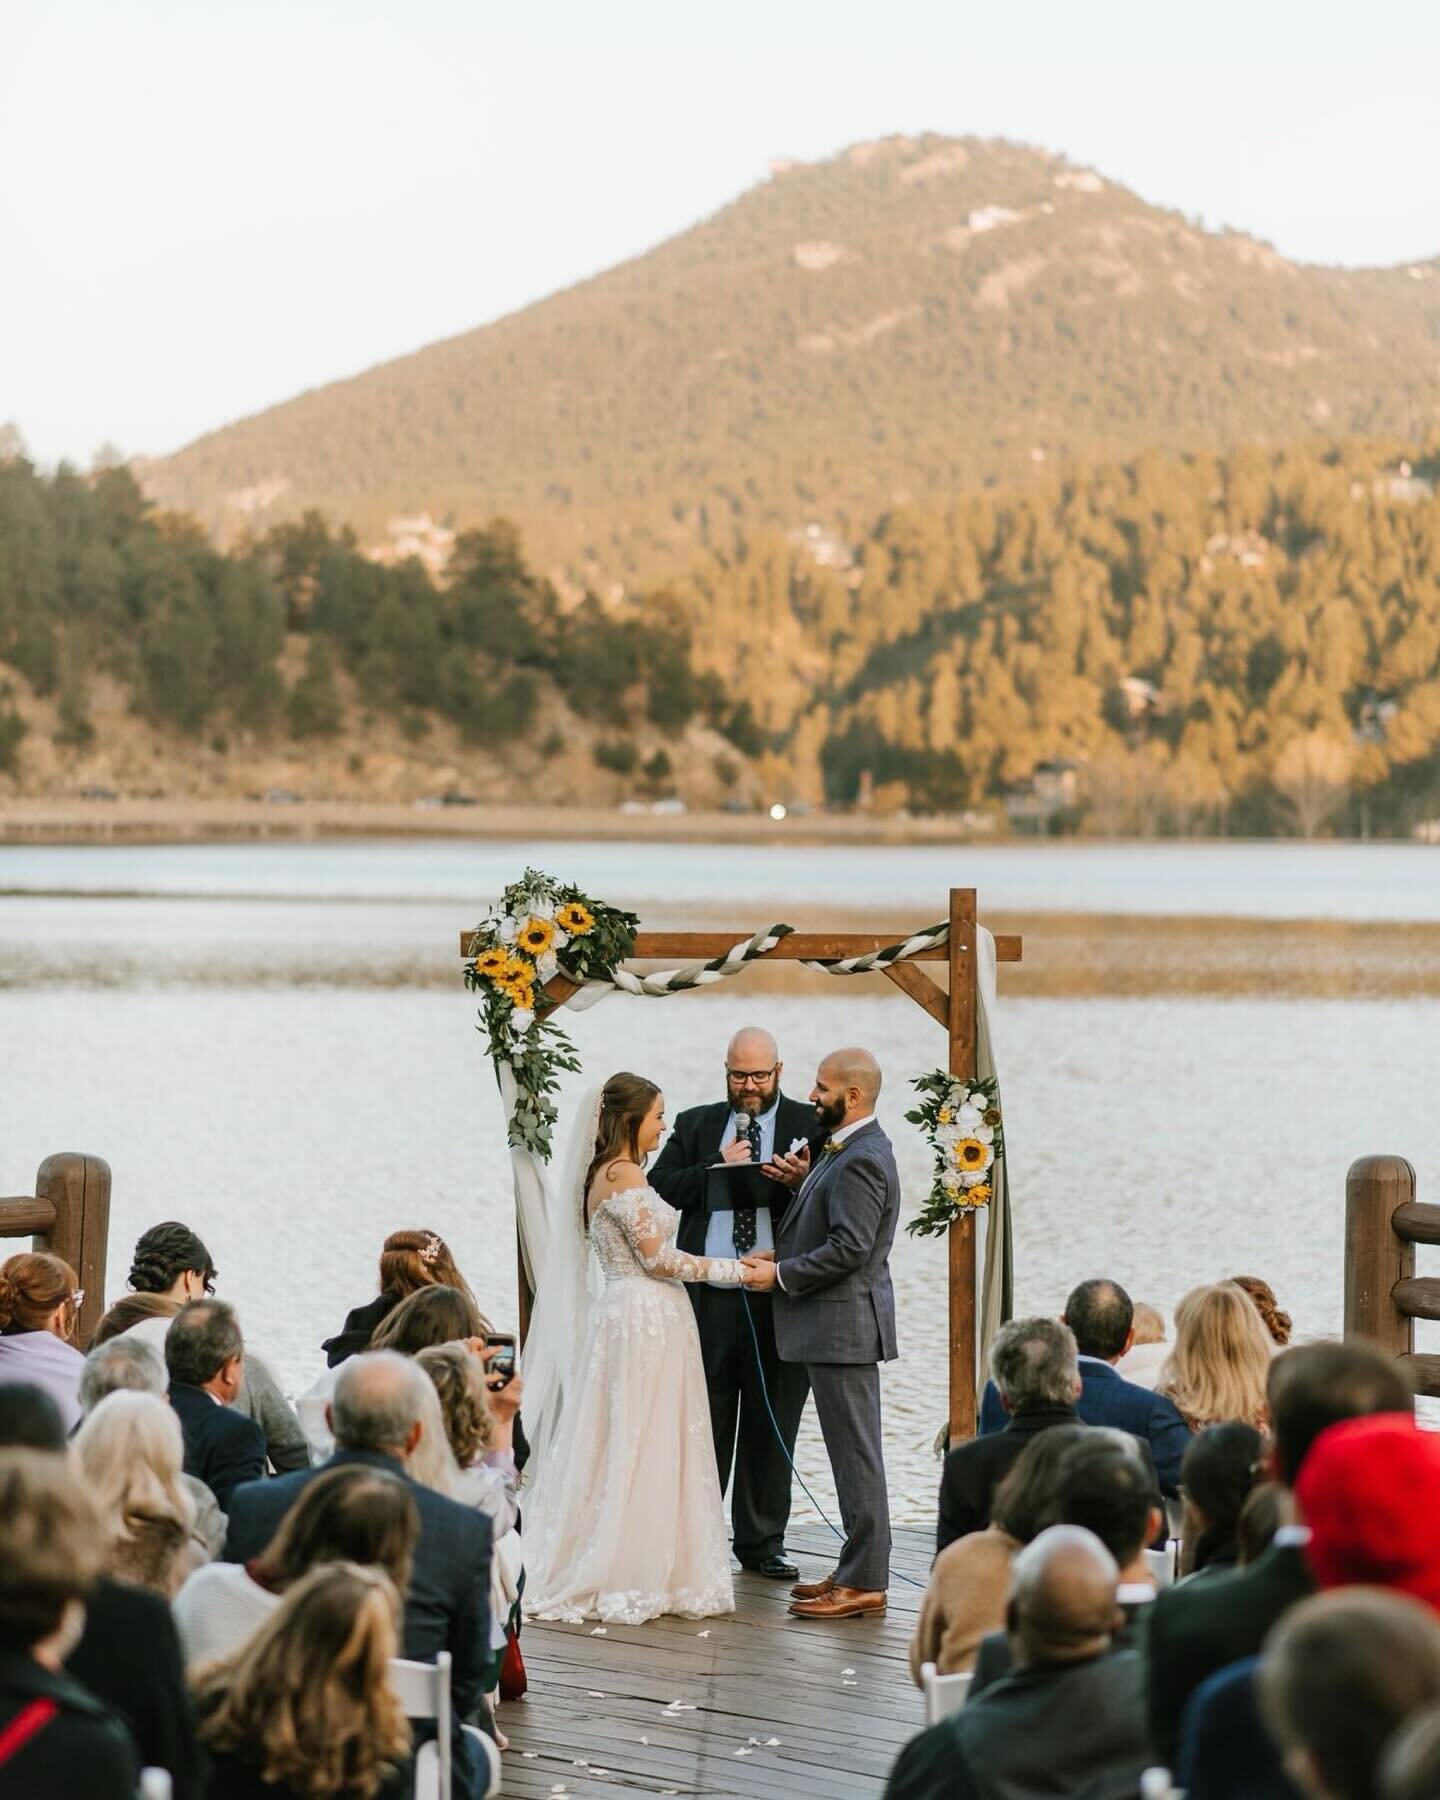 These blue hour ceremonies this time of year feel so wintery and cozy. I just love seeing the setting sunlight glow on the tops of the hills and trees, and everybody bundled up enjoying all the ceremony feels.
.
.
.
.
.
.
#cabinwedding #coloradoweddi